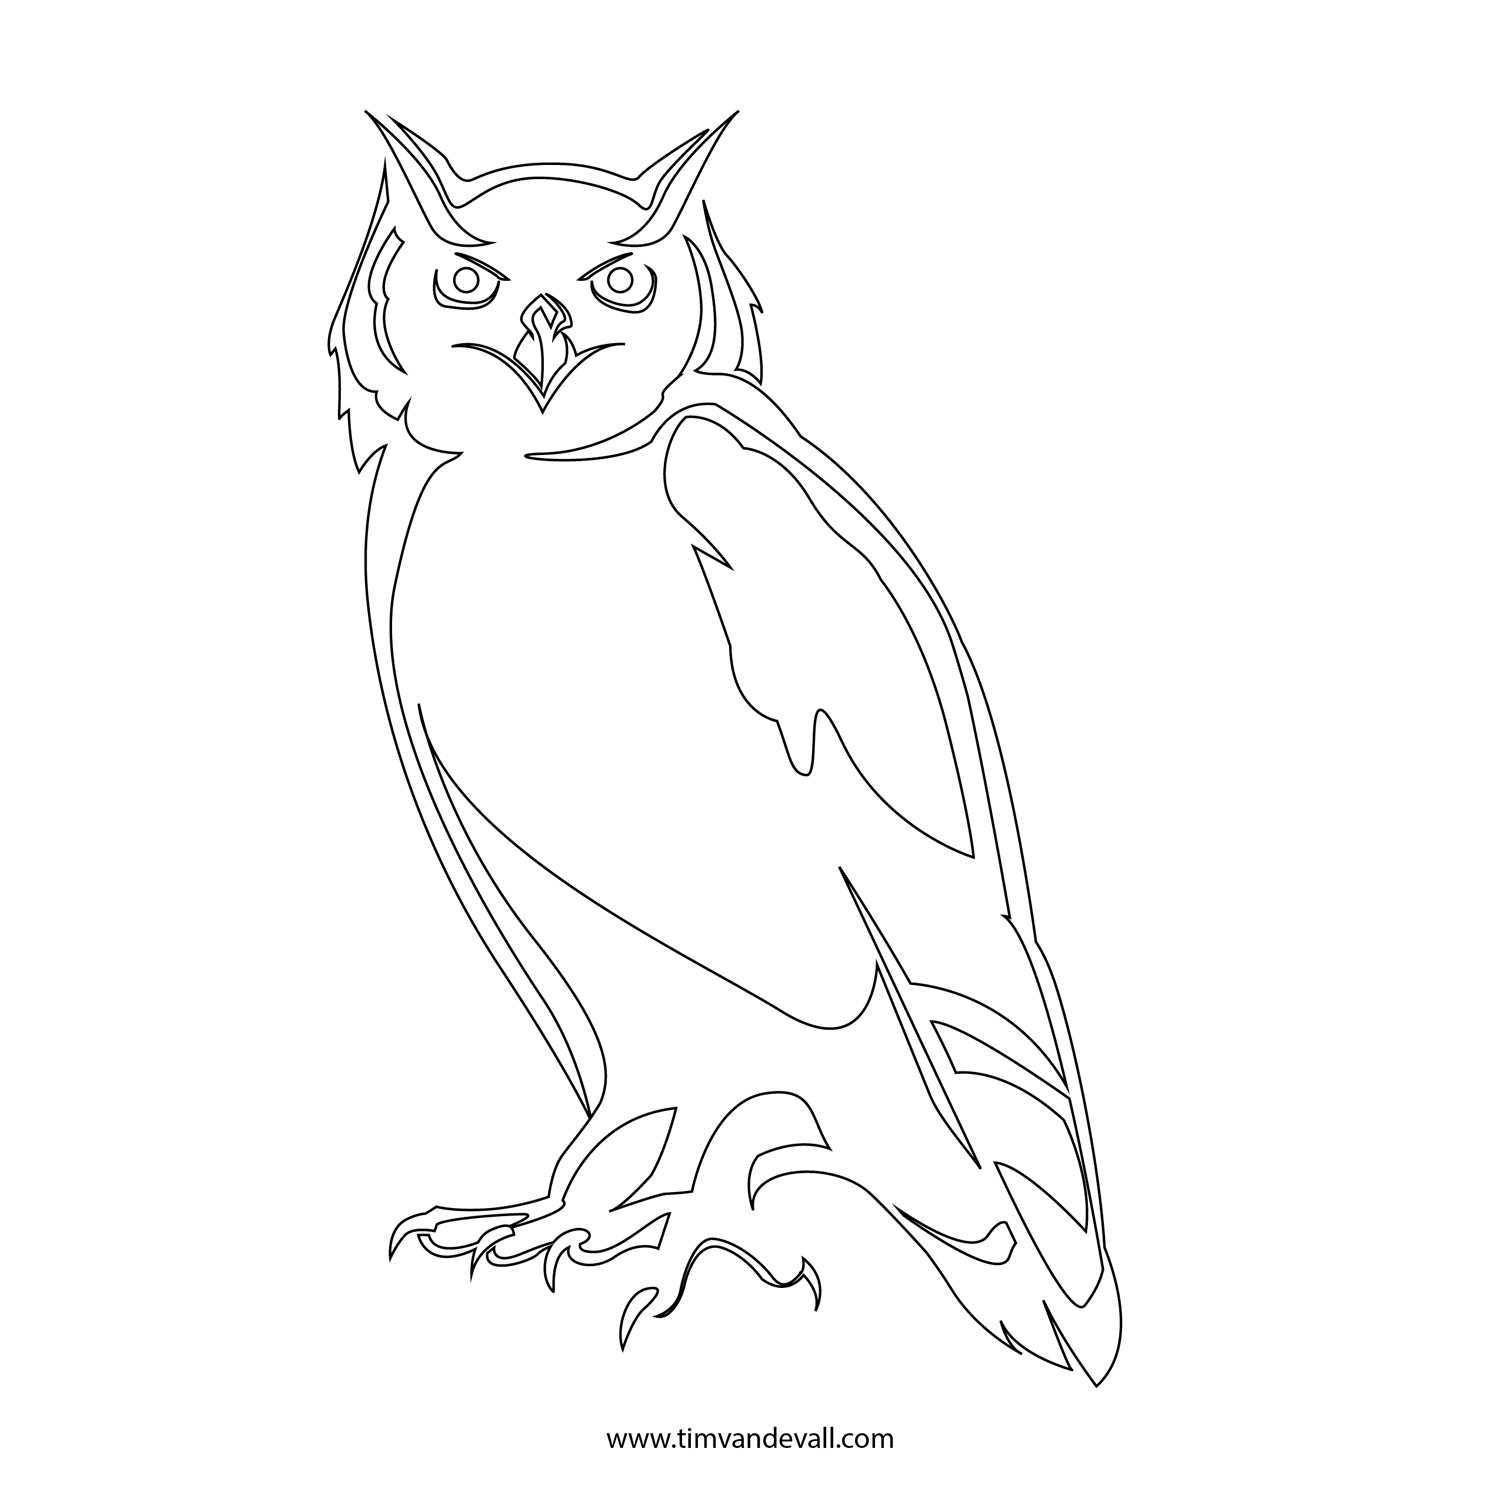 Owl Stencil Template | Free Printable Owl Outline & Silhouette